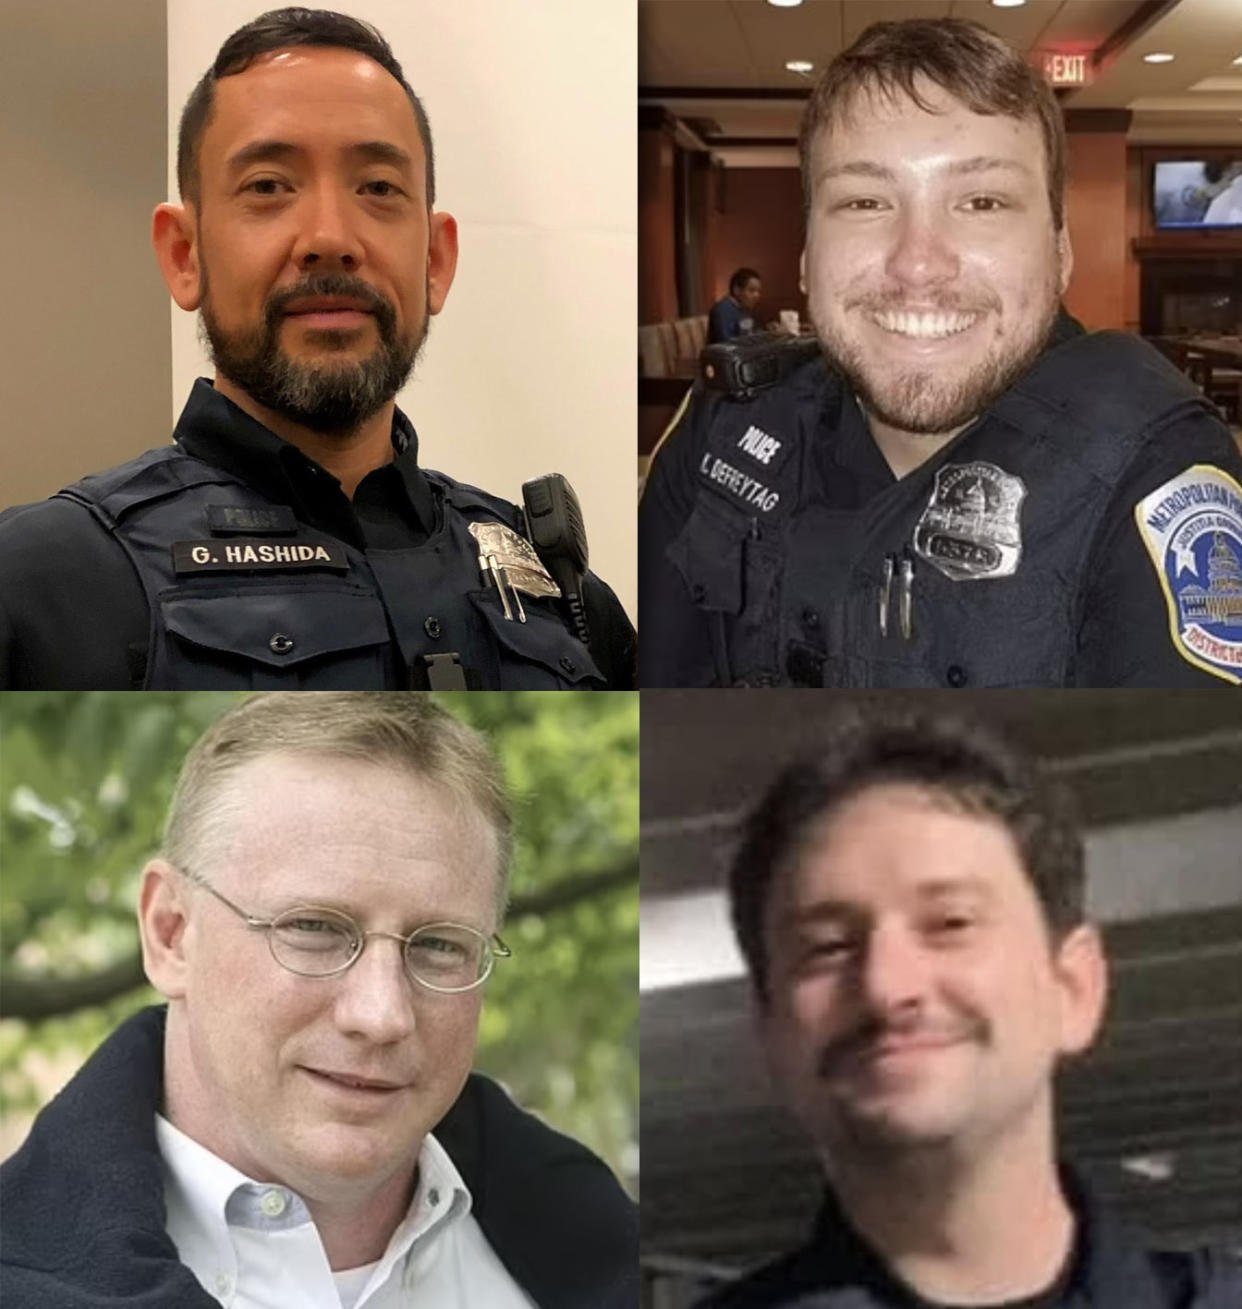 D.C. Metropolitan Police Officers Gunther Hashida, Kyle DeFreytag, and Jeffrey Smith, and U.S. Capitol Police Officer Howard Liebengood have all died by suicide after responding to the violent attack on the U.S. Capitol by a pro-Trump mob on Jan. 6, 2021.  (Mountcastle Turch Funeral Home, Bensing-Thomas Funeral Home, Money and King Funeral Home, Facebook)